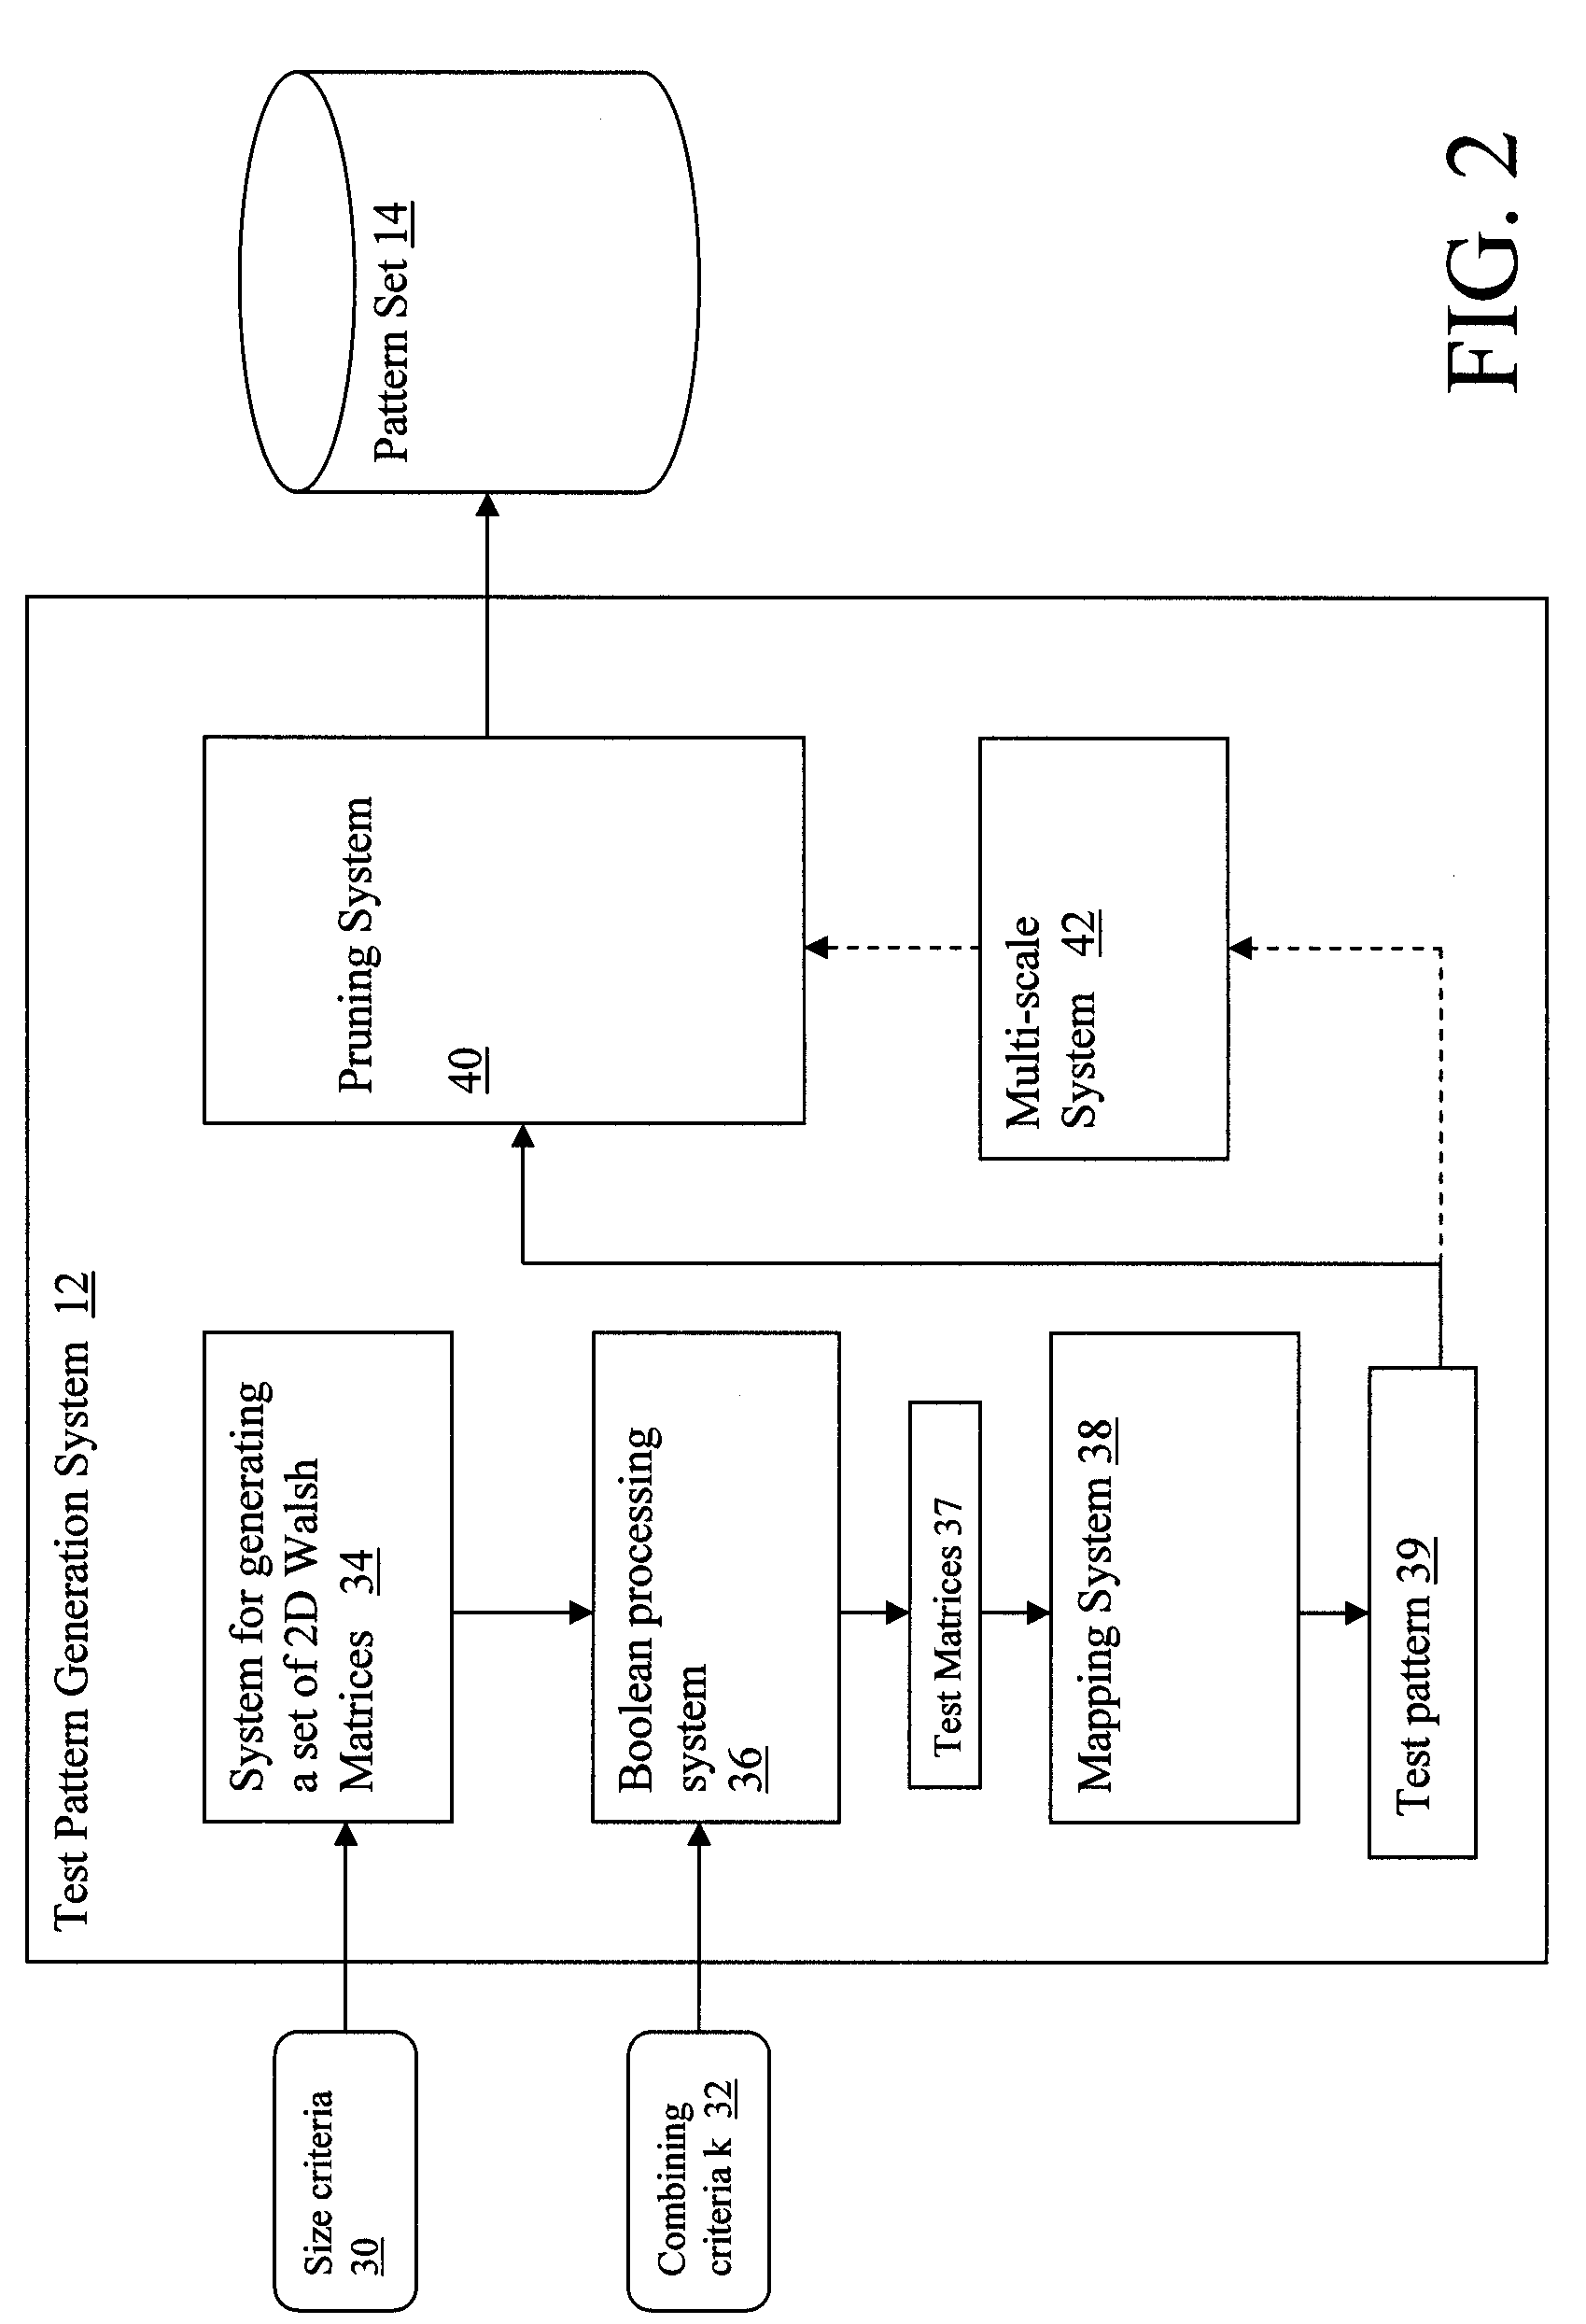 Method for generating a set of test patterns for an optical proximity correction algorithm